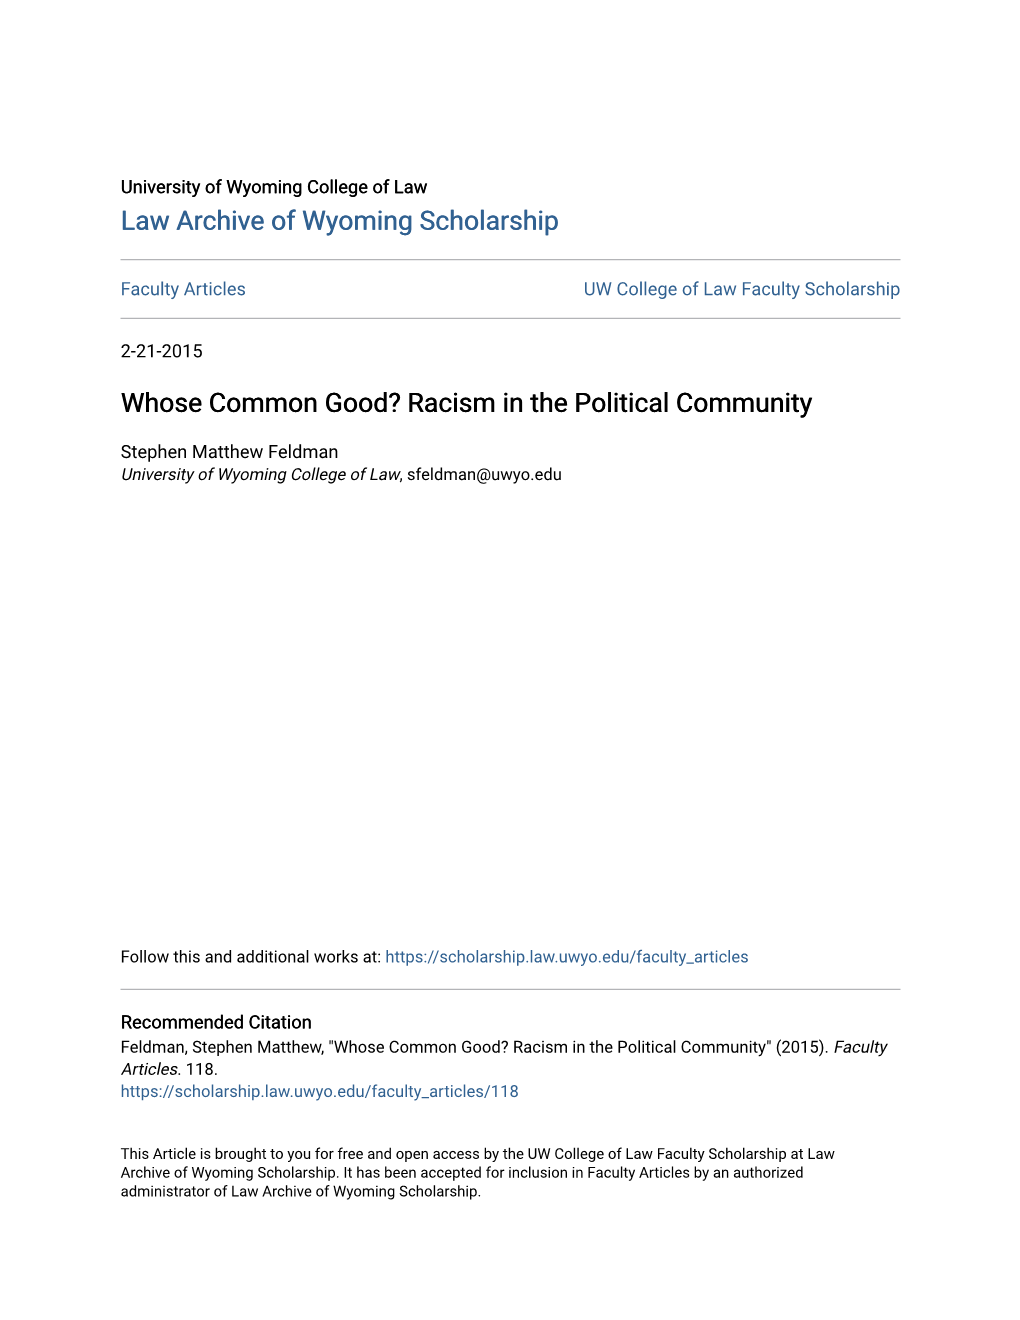 Whose Common Good? Racism in the Political Community